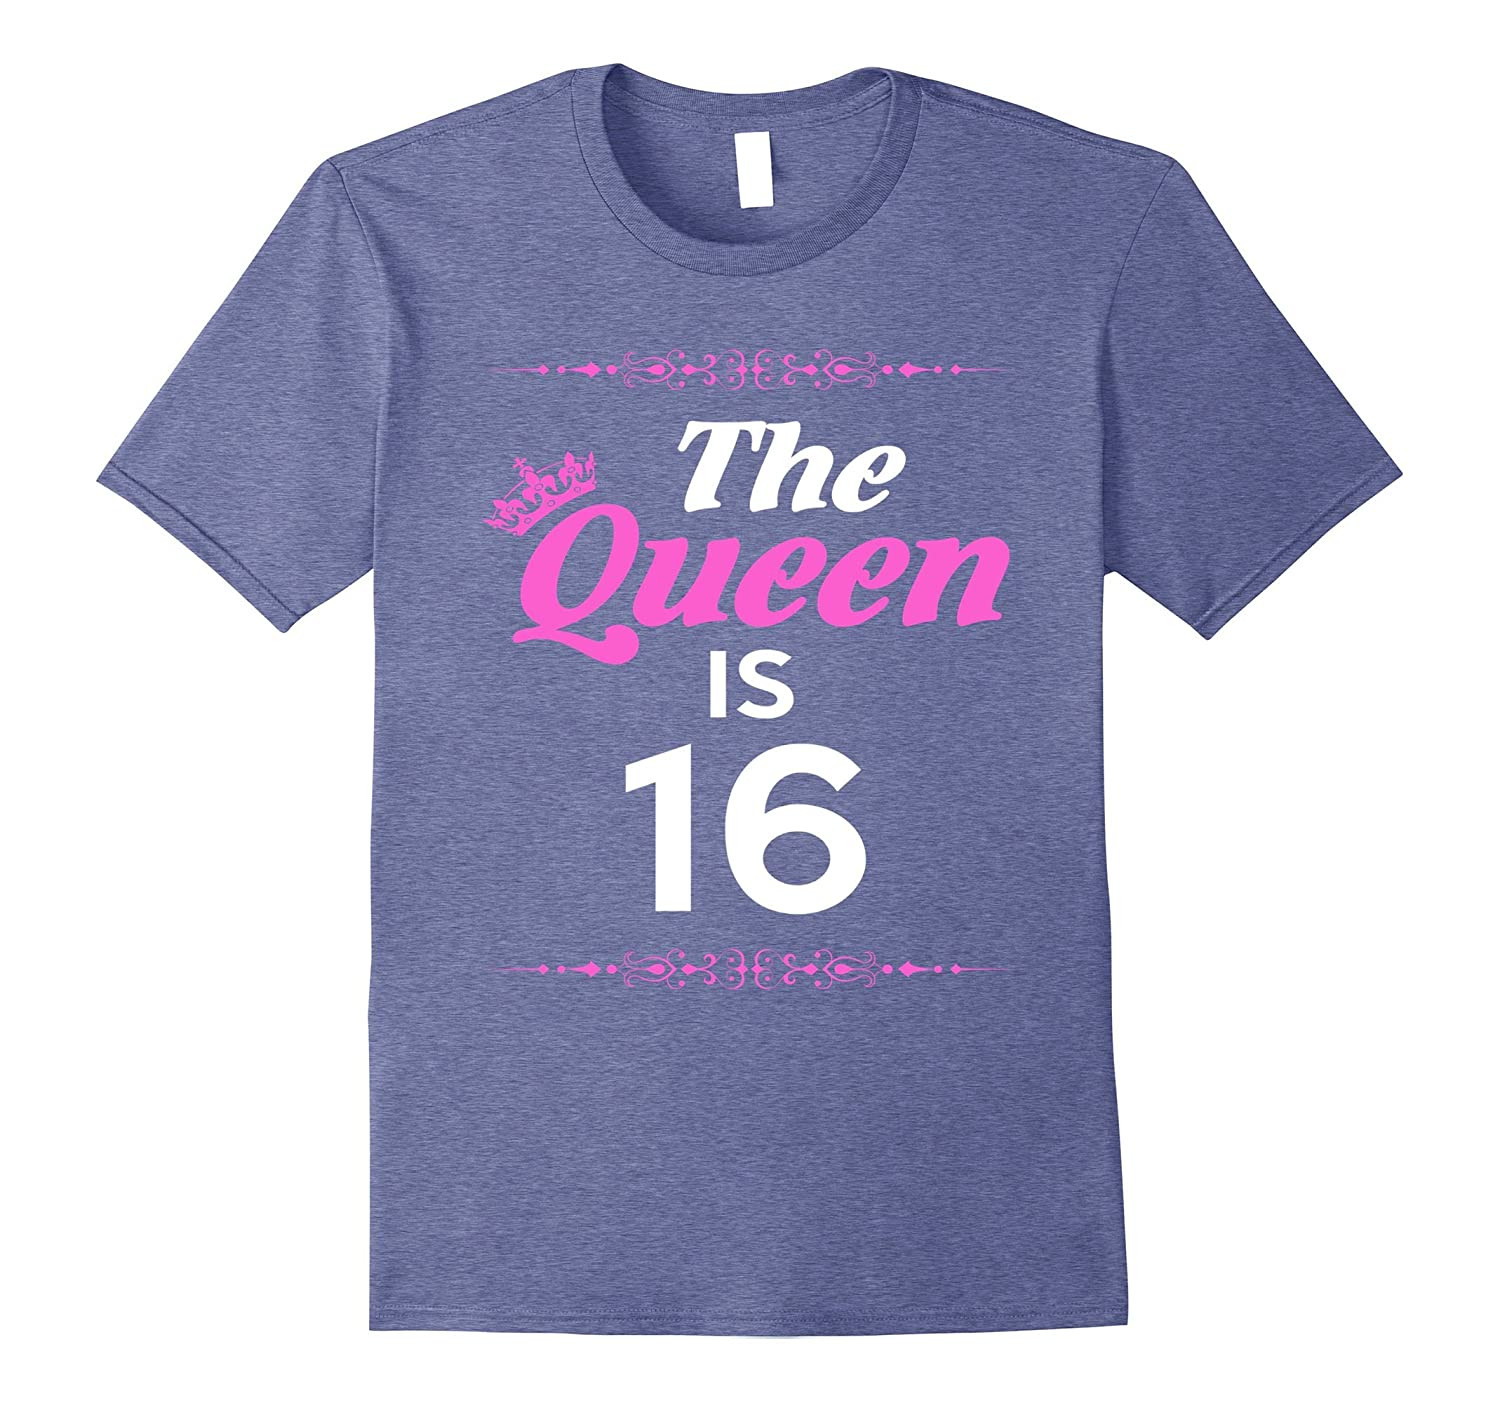 Gift Ideas For 16 Year Old Girls
 Queen is 16 Year Old 16th Birthday Gift Ideas for her